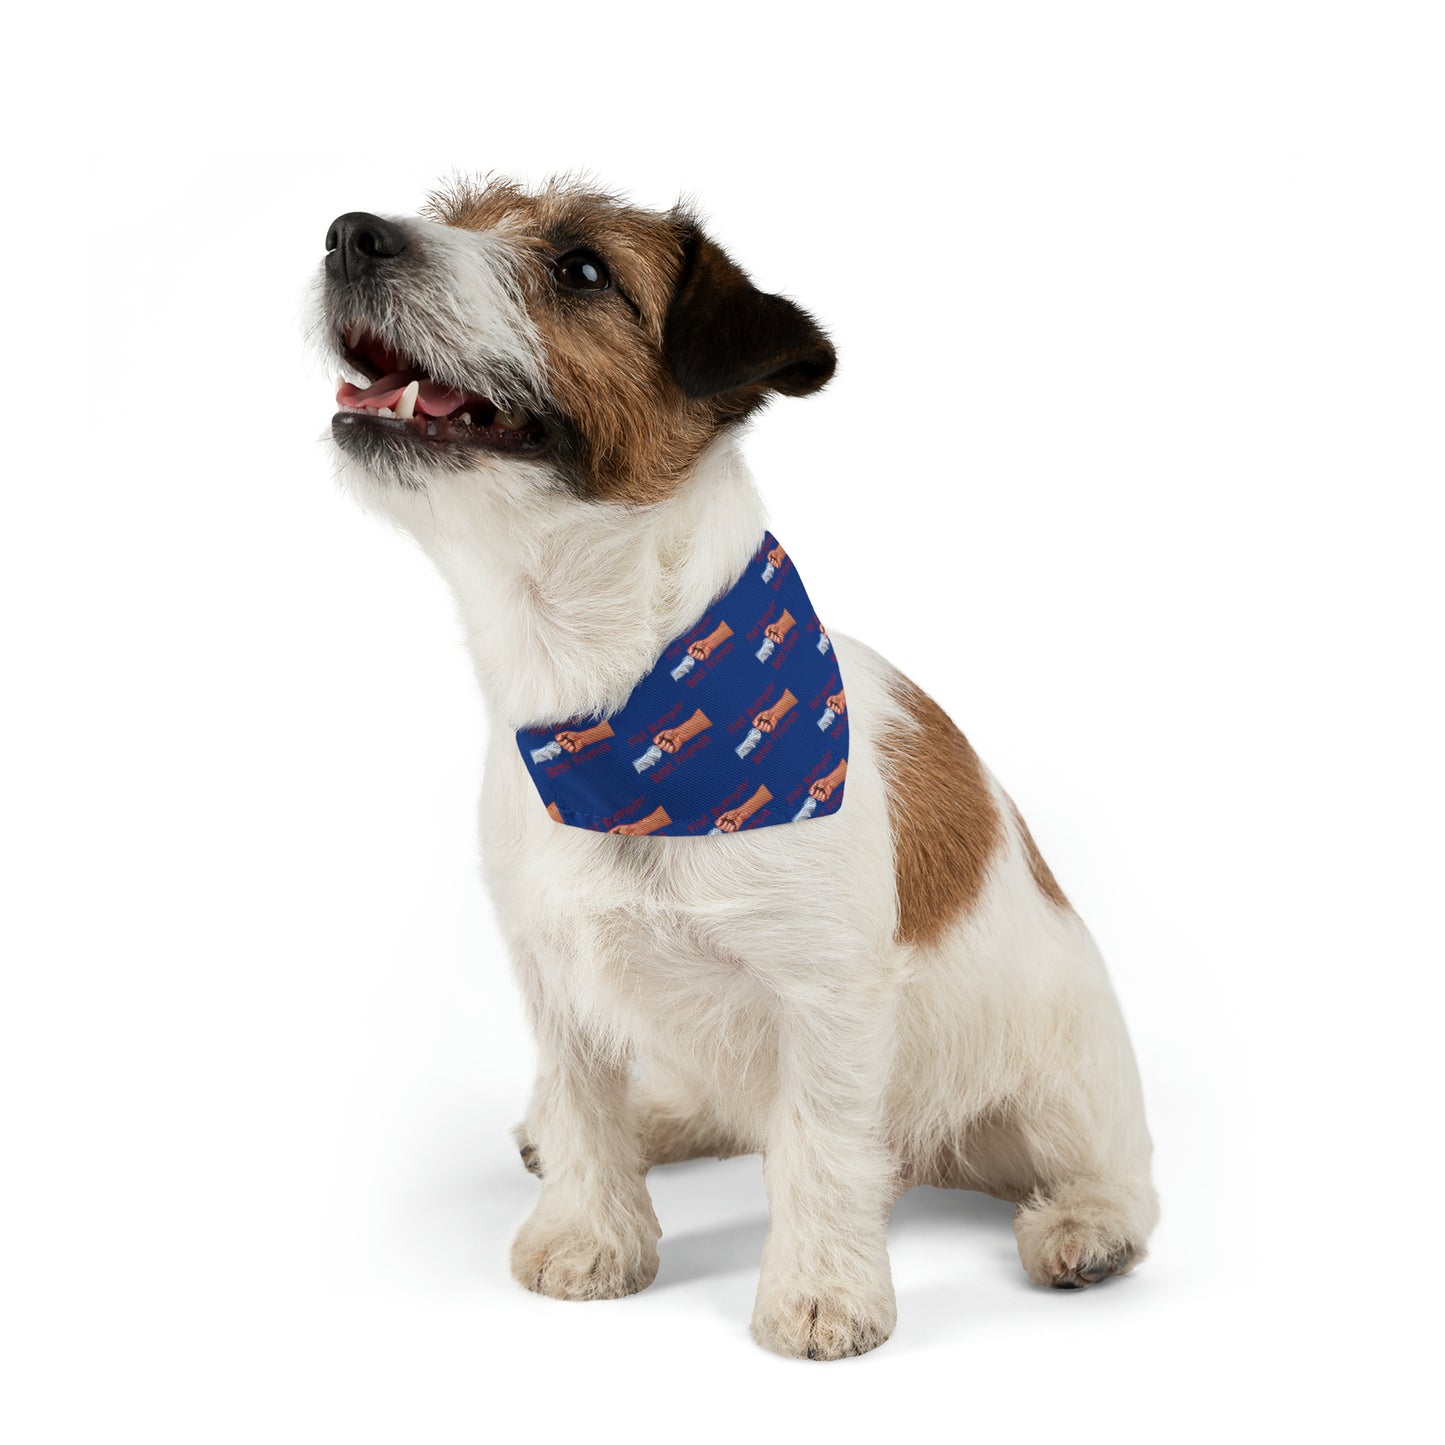 Fist Bumpin’ Best Friends Opie’s Cavalier King Charles Spaniel Pet Bandana Collar Blue with Red lettering.